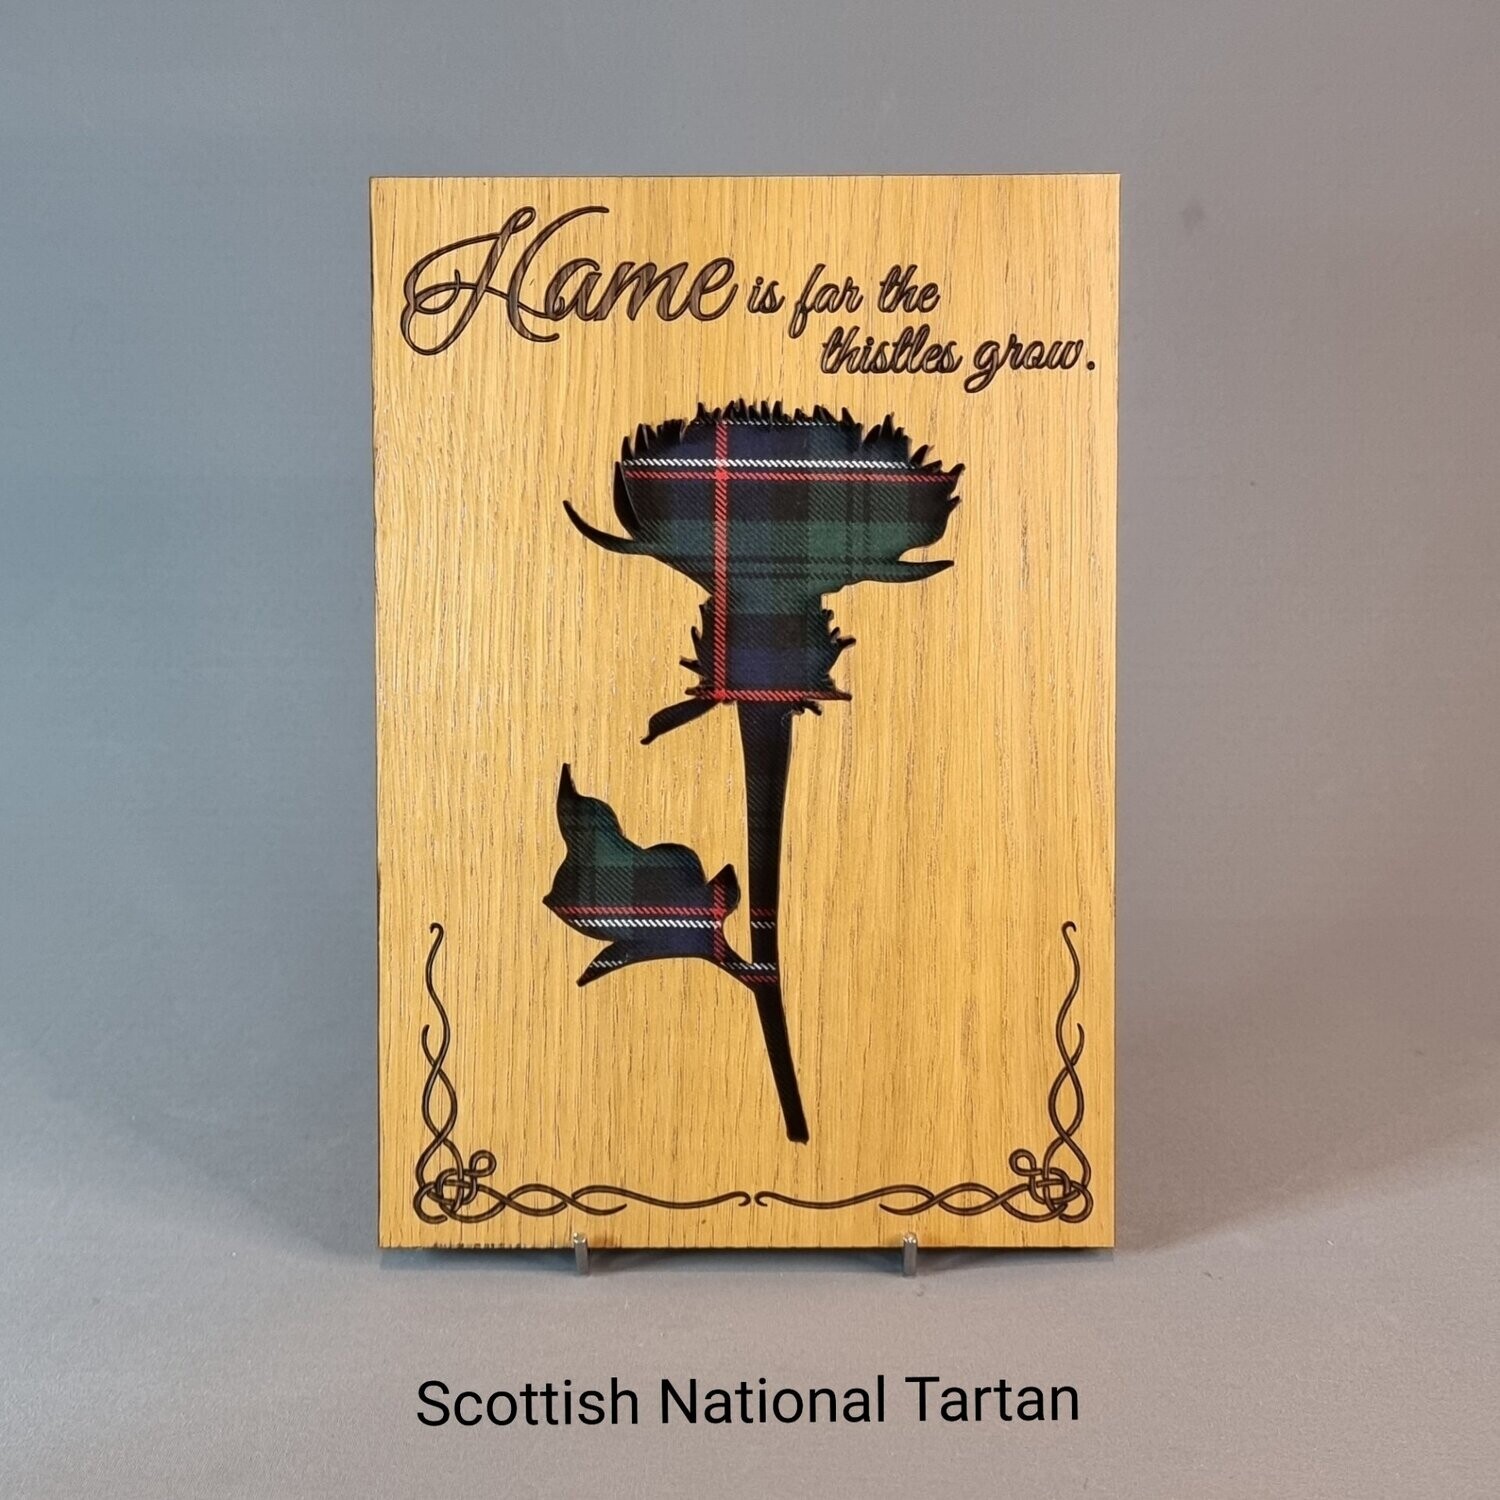 Scottish Thistle Oak Frame With Tartan & "Hame is far the thistle grows" Quote.